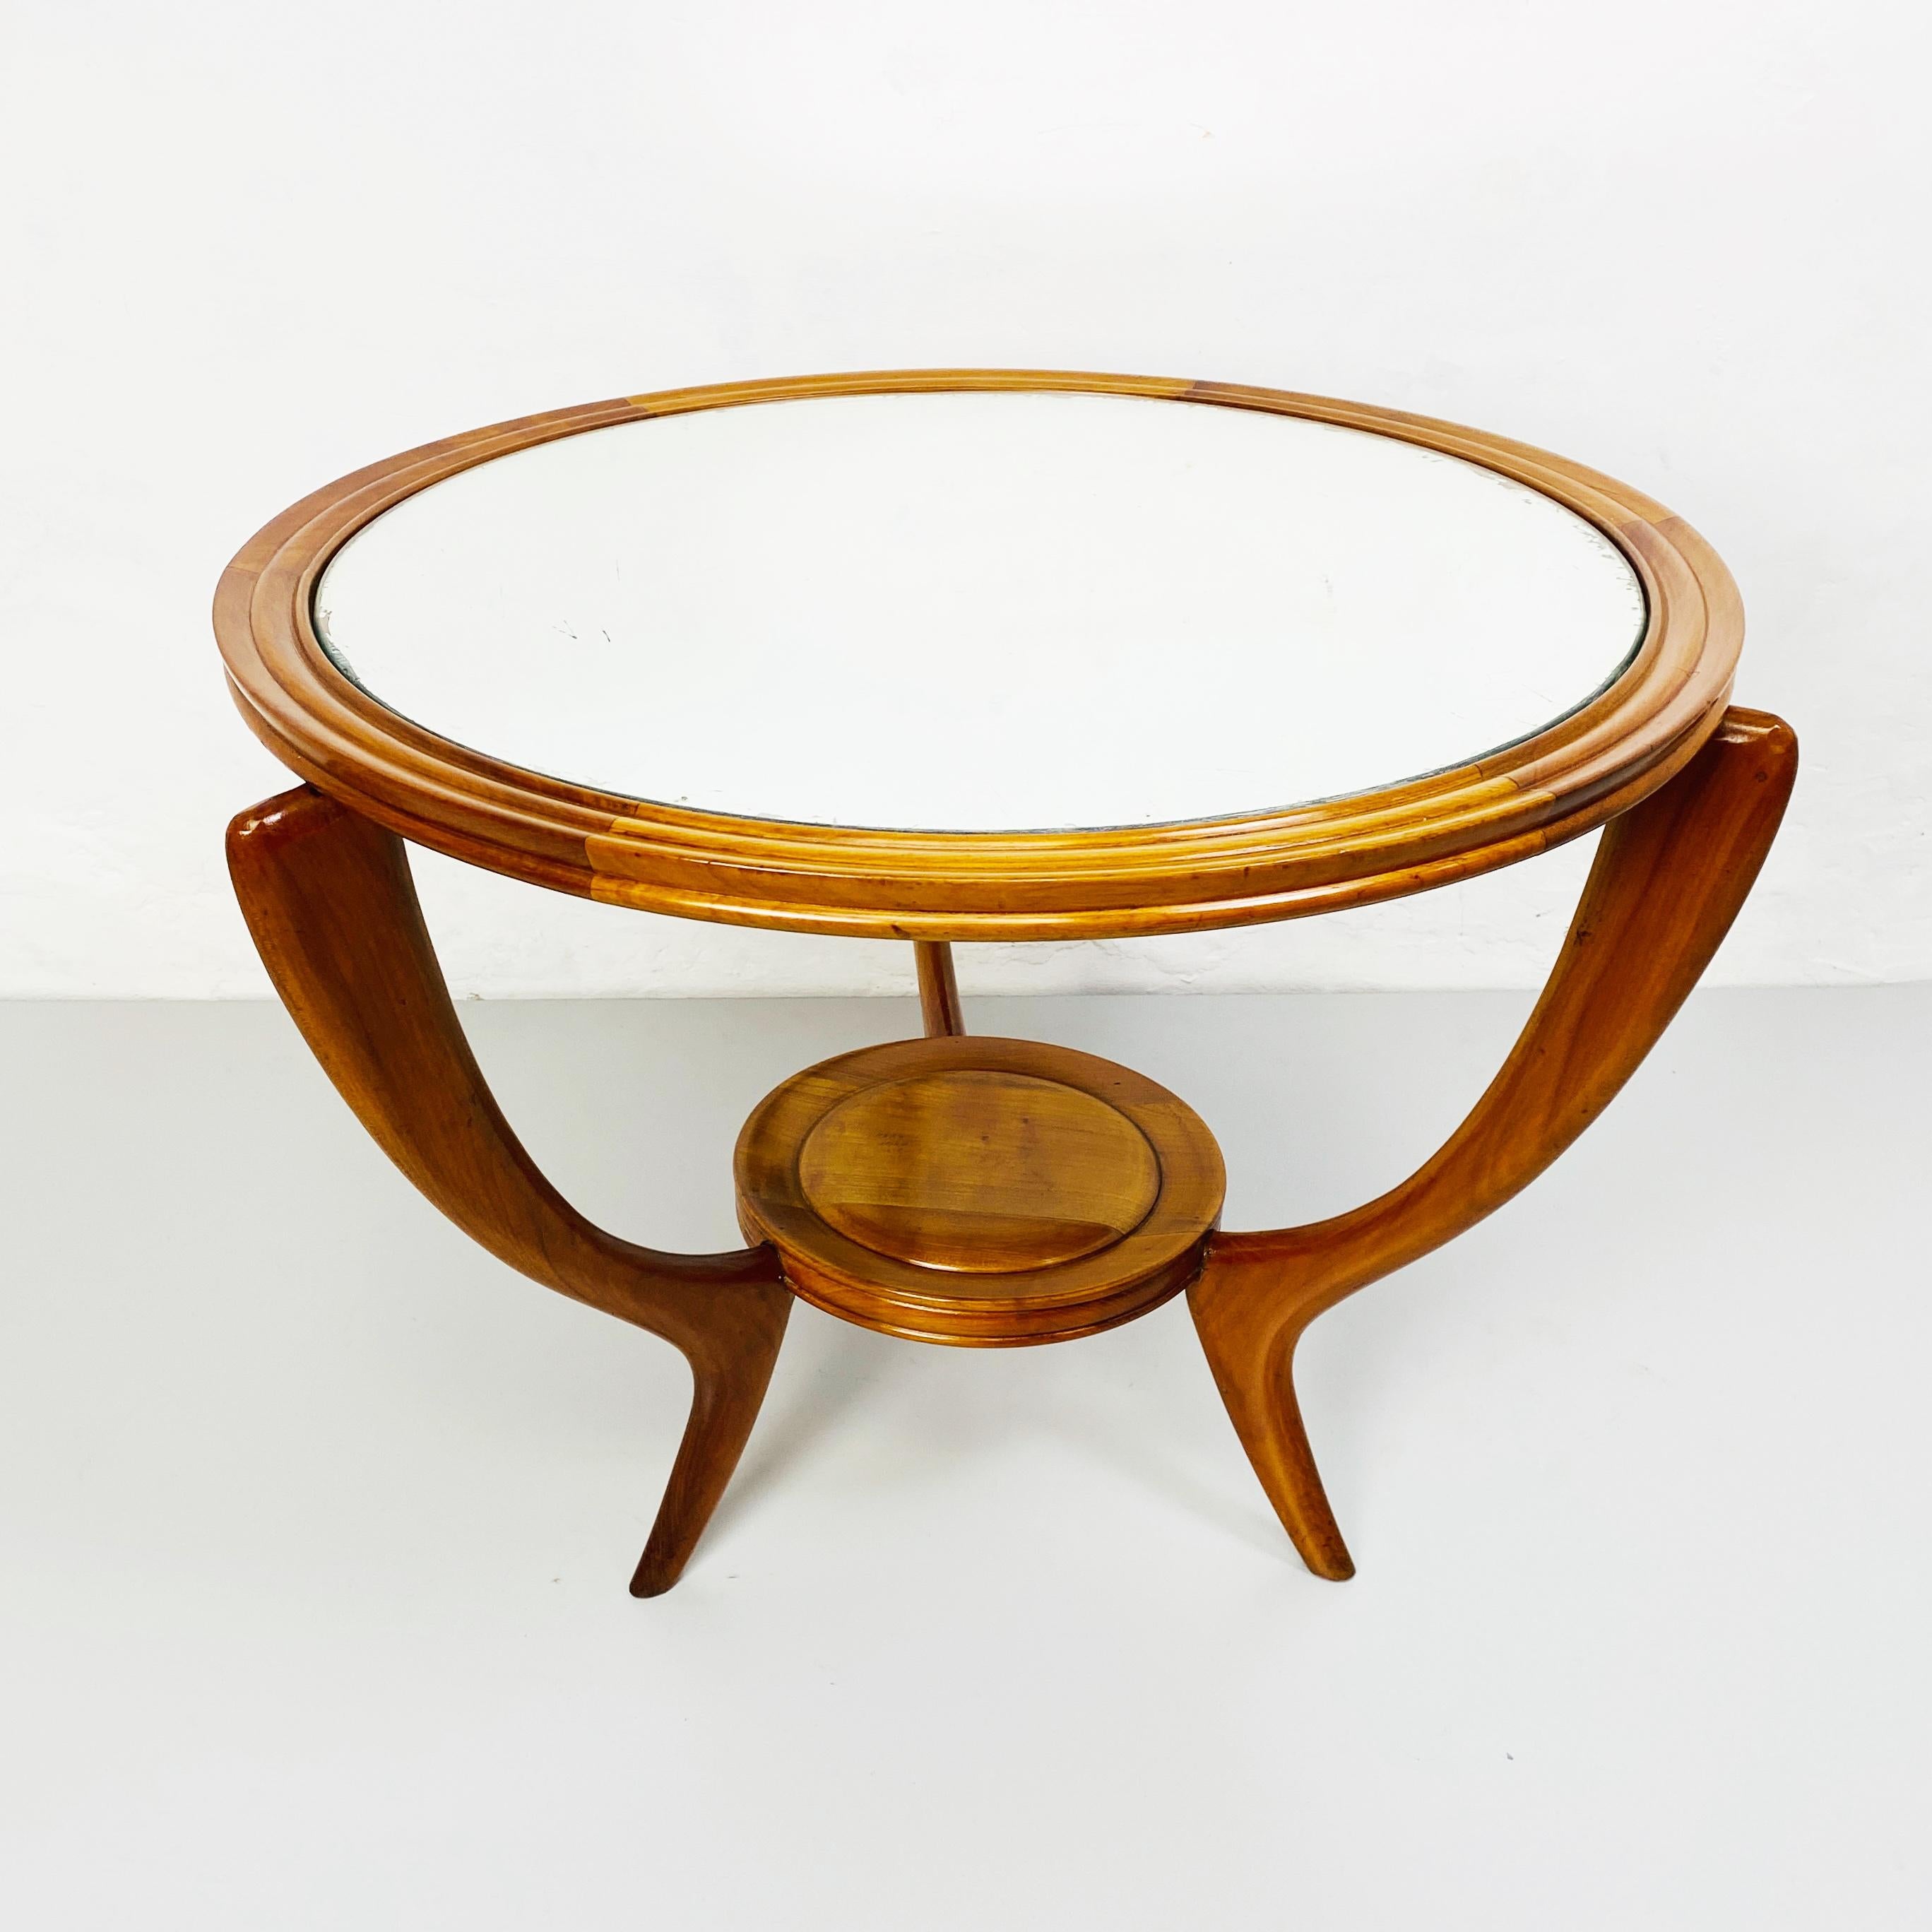 Italian Mid-Century Wood Round Table with Mirror, 1950s For Sale 5